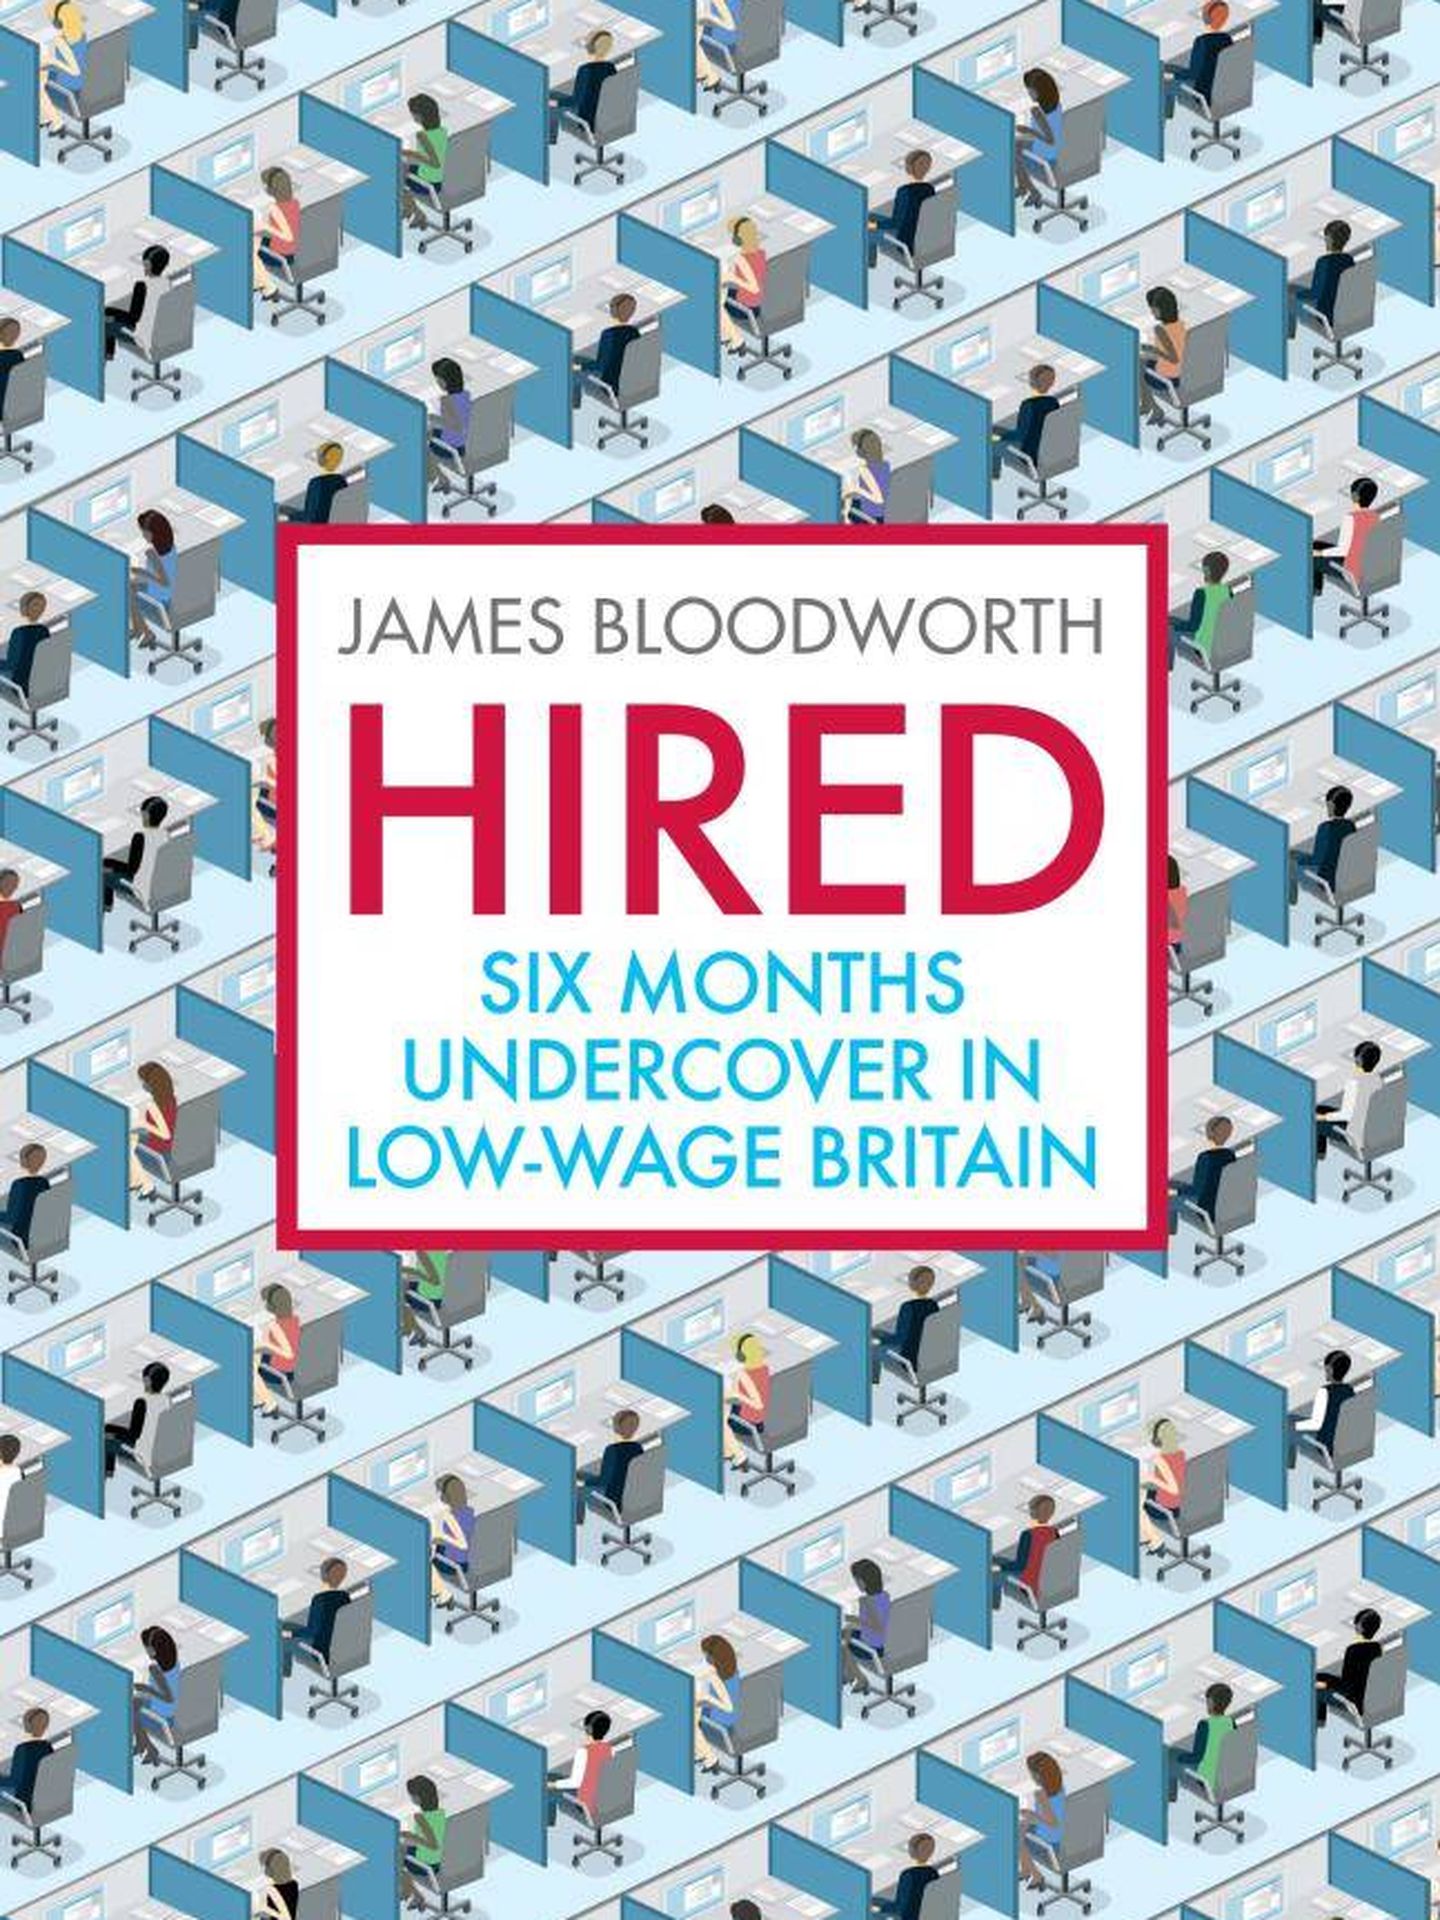 Portada del libro 'Hired: six months undercover in low-wage Britain'.